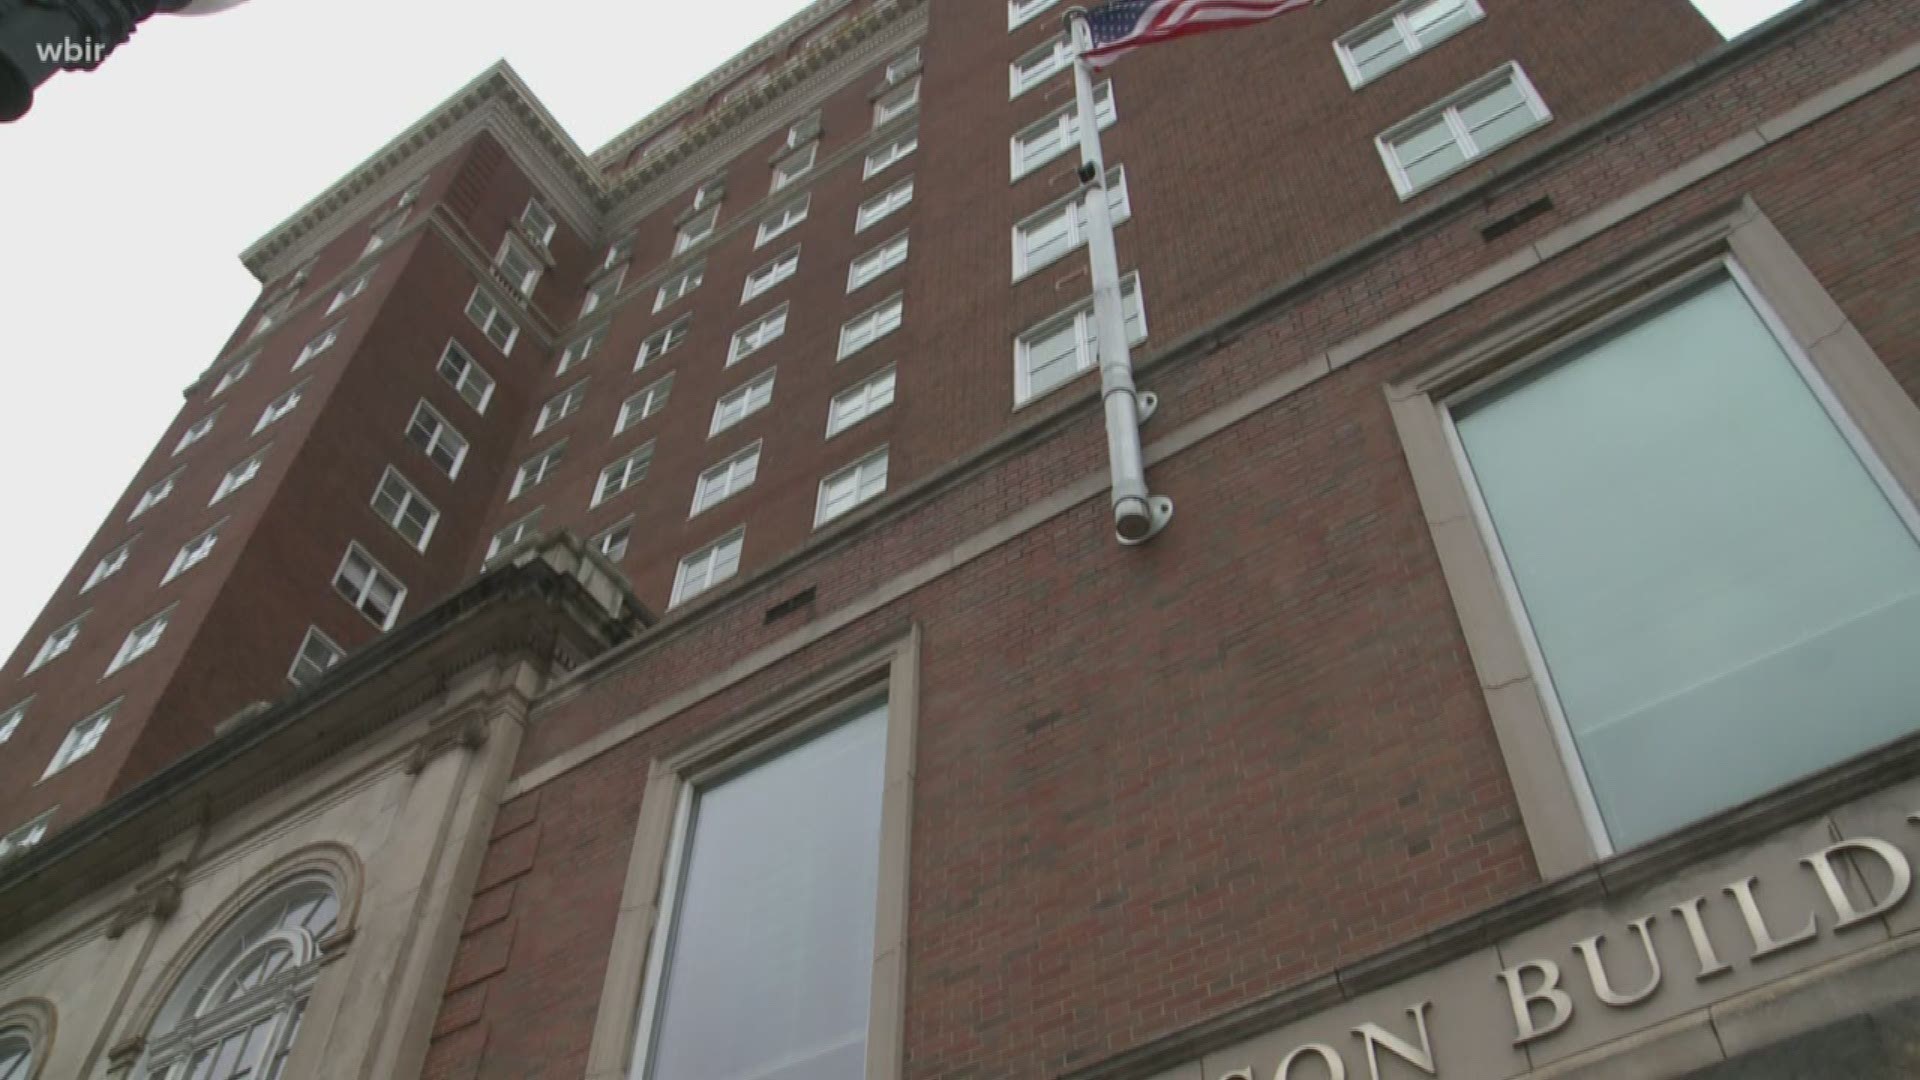 Mayor Jacobs said the Andrew Johnson Building was built in the 1920s as a hotel and isn't equipped to meet the office needs for Knox County Schools.